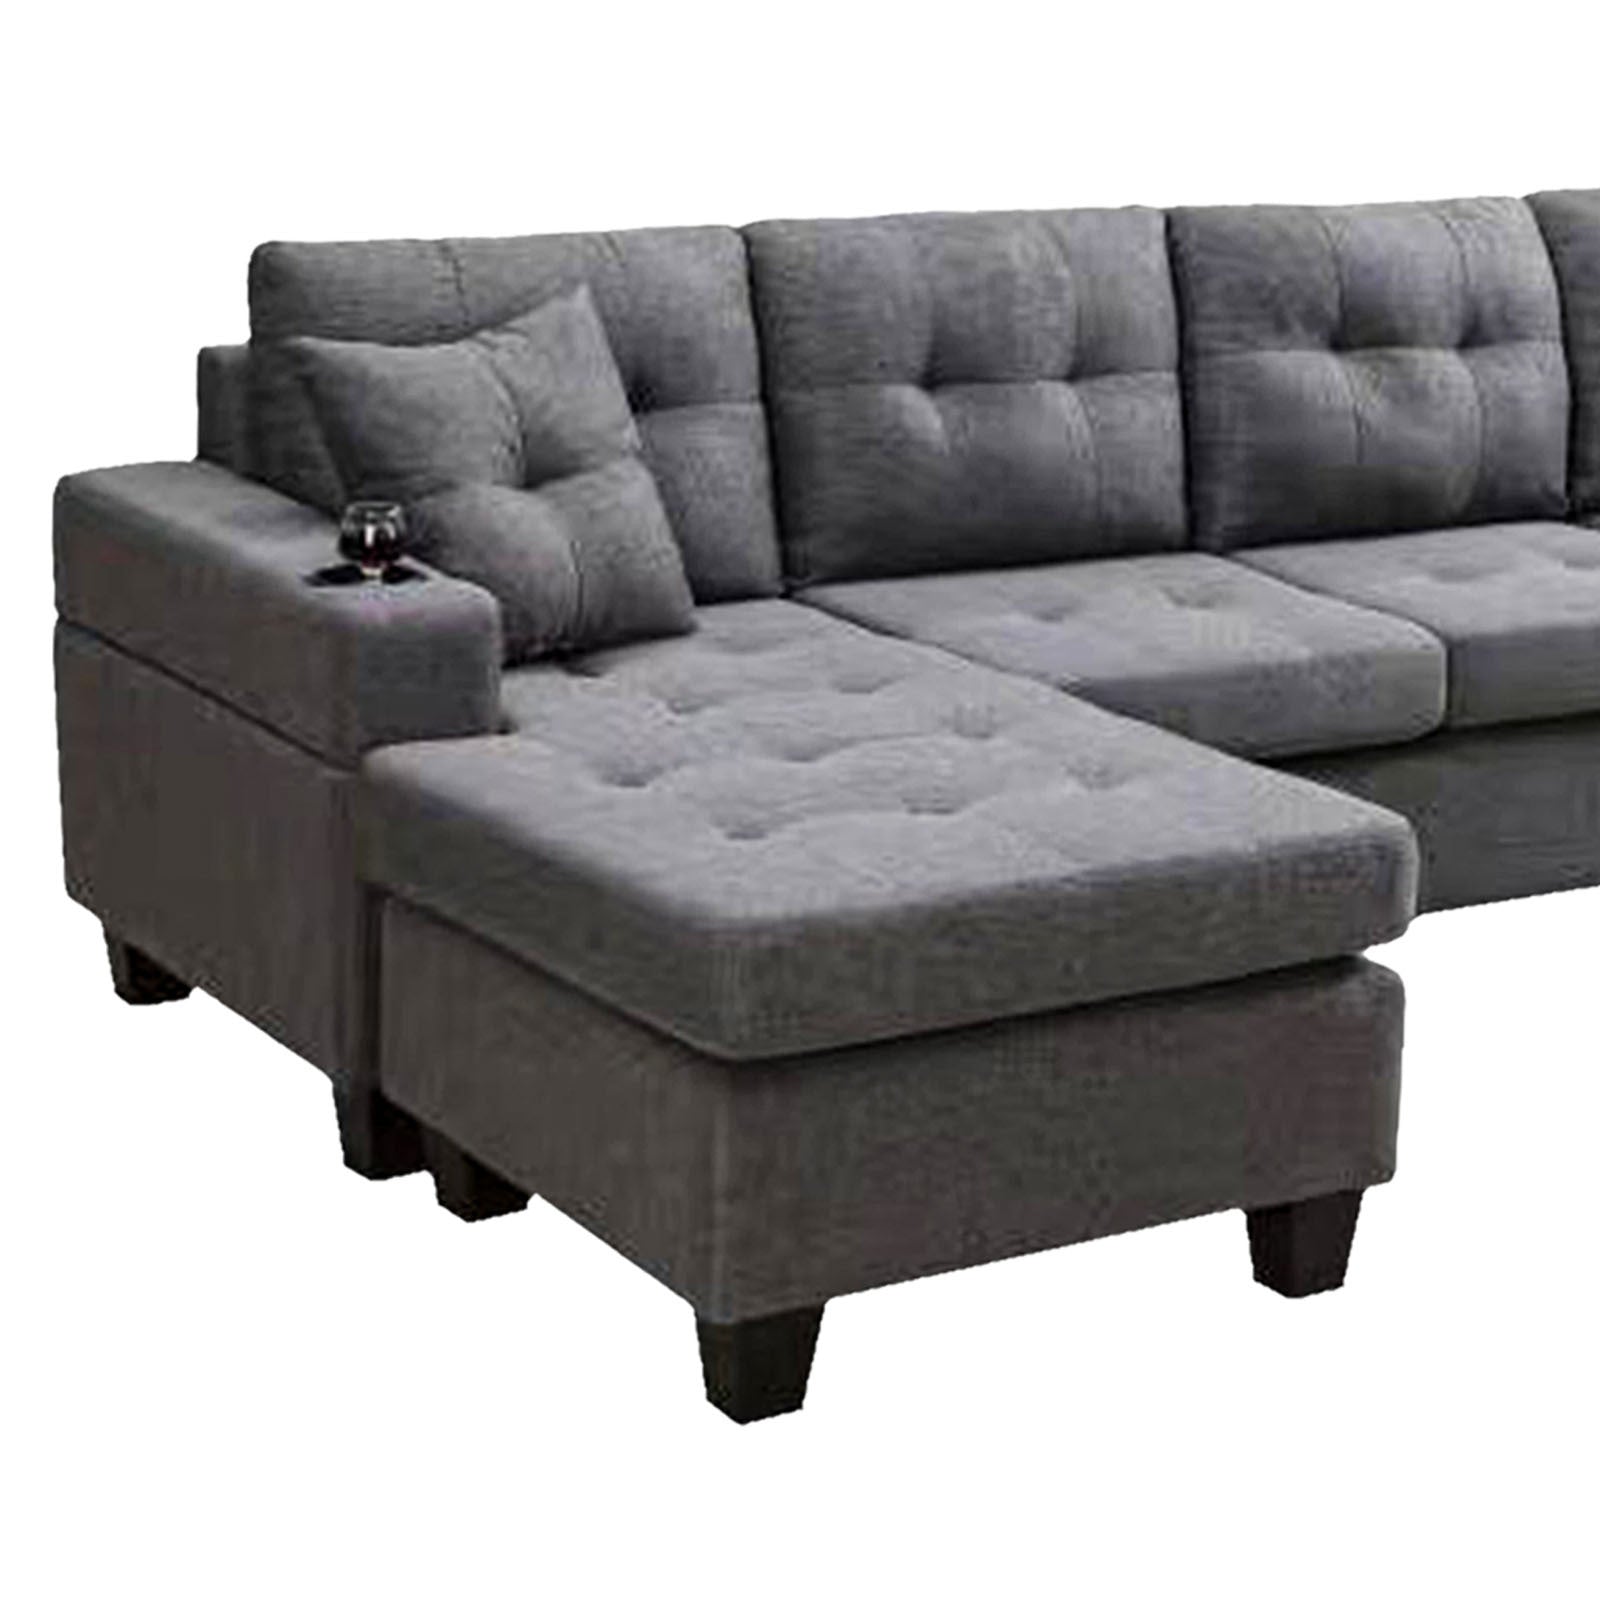 MEGA sectional sofa left with footrest, convertible gray-foam-fabric